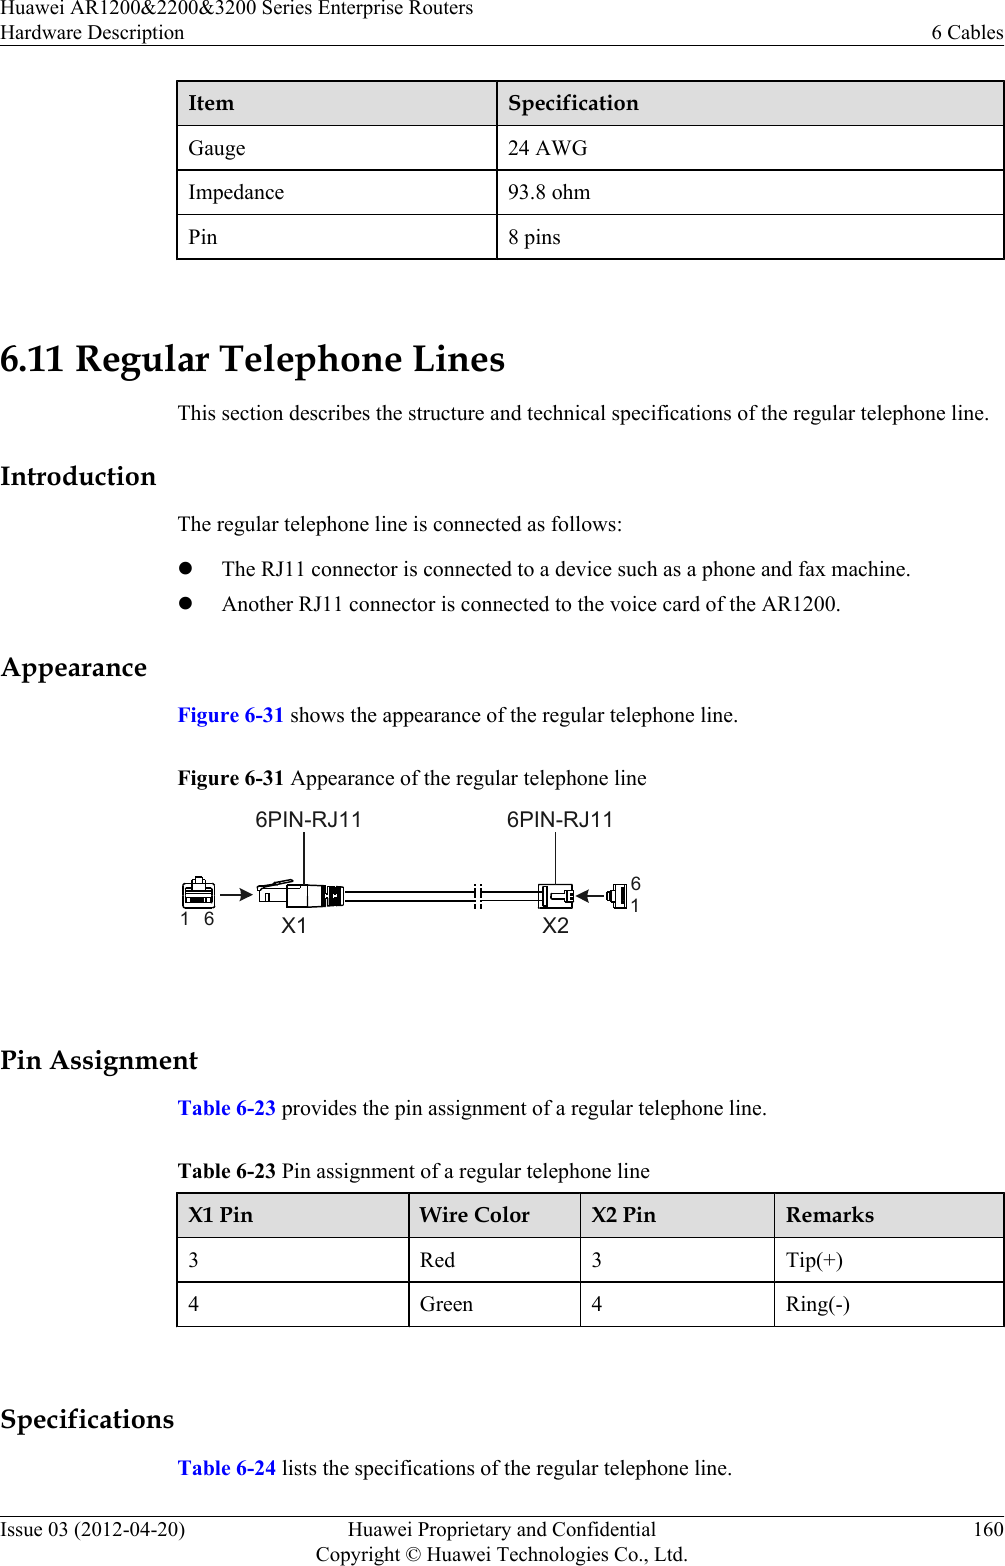 Item SpecificationGauge 24 AWGImpedance 93.8 ohmPin 8 pins 6.11 Regular Telephone LinesThis section describes the structure and technical specifications of the regular telephone line.IntroductionThe regular telephone line is connected as follows:lThe RJ11 connector is connected to a device such as a phone and fax machine.lAnother RJ11 connector is connected to the voice card of the AR1200.AppearanceFigure 6-31 shows the appearance of the regular telephone line.Figure 6-31 Appearance of the regular telephone lineX11 6 X2166PIN-RJ11 6PIN-RJ11 Pin AssignmentTable 6-23 provides the pin assignment of a regular telephone line.Table 6-23 Pin assignment of a regular telephone lineX1 Pin Wire Color X2 Pin Remarks3Red 3 Tip(+)4 Green 4 Ring(-) SpecificationsTable 6-24 lists the specifications of the regular telephone line.Huawei AR1200&amp;2200&amp;3200 Series Enterprise RoutersHardware Description 6 CablesIssue 03 (2012-04-20) Huawei Proprietary and ConfidentialCopyright © Huawei Technologies Co., Ltd.160